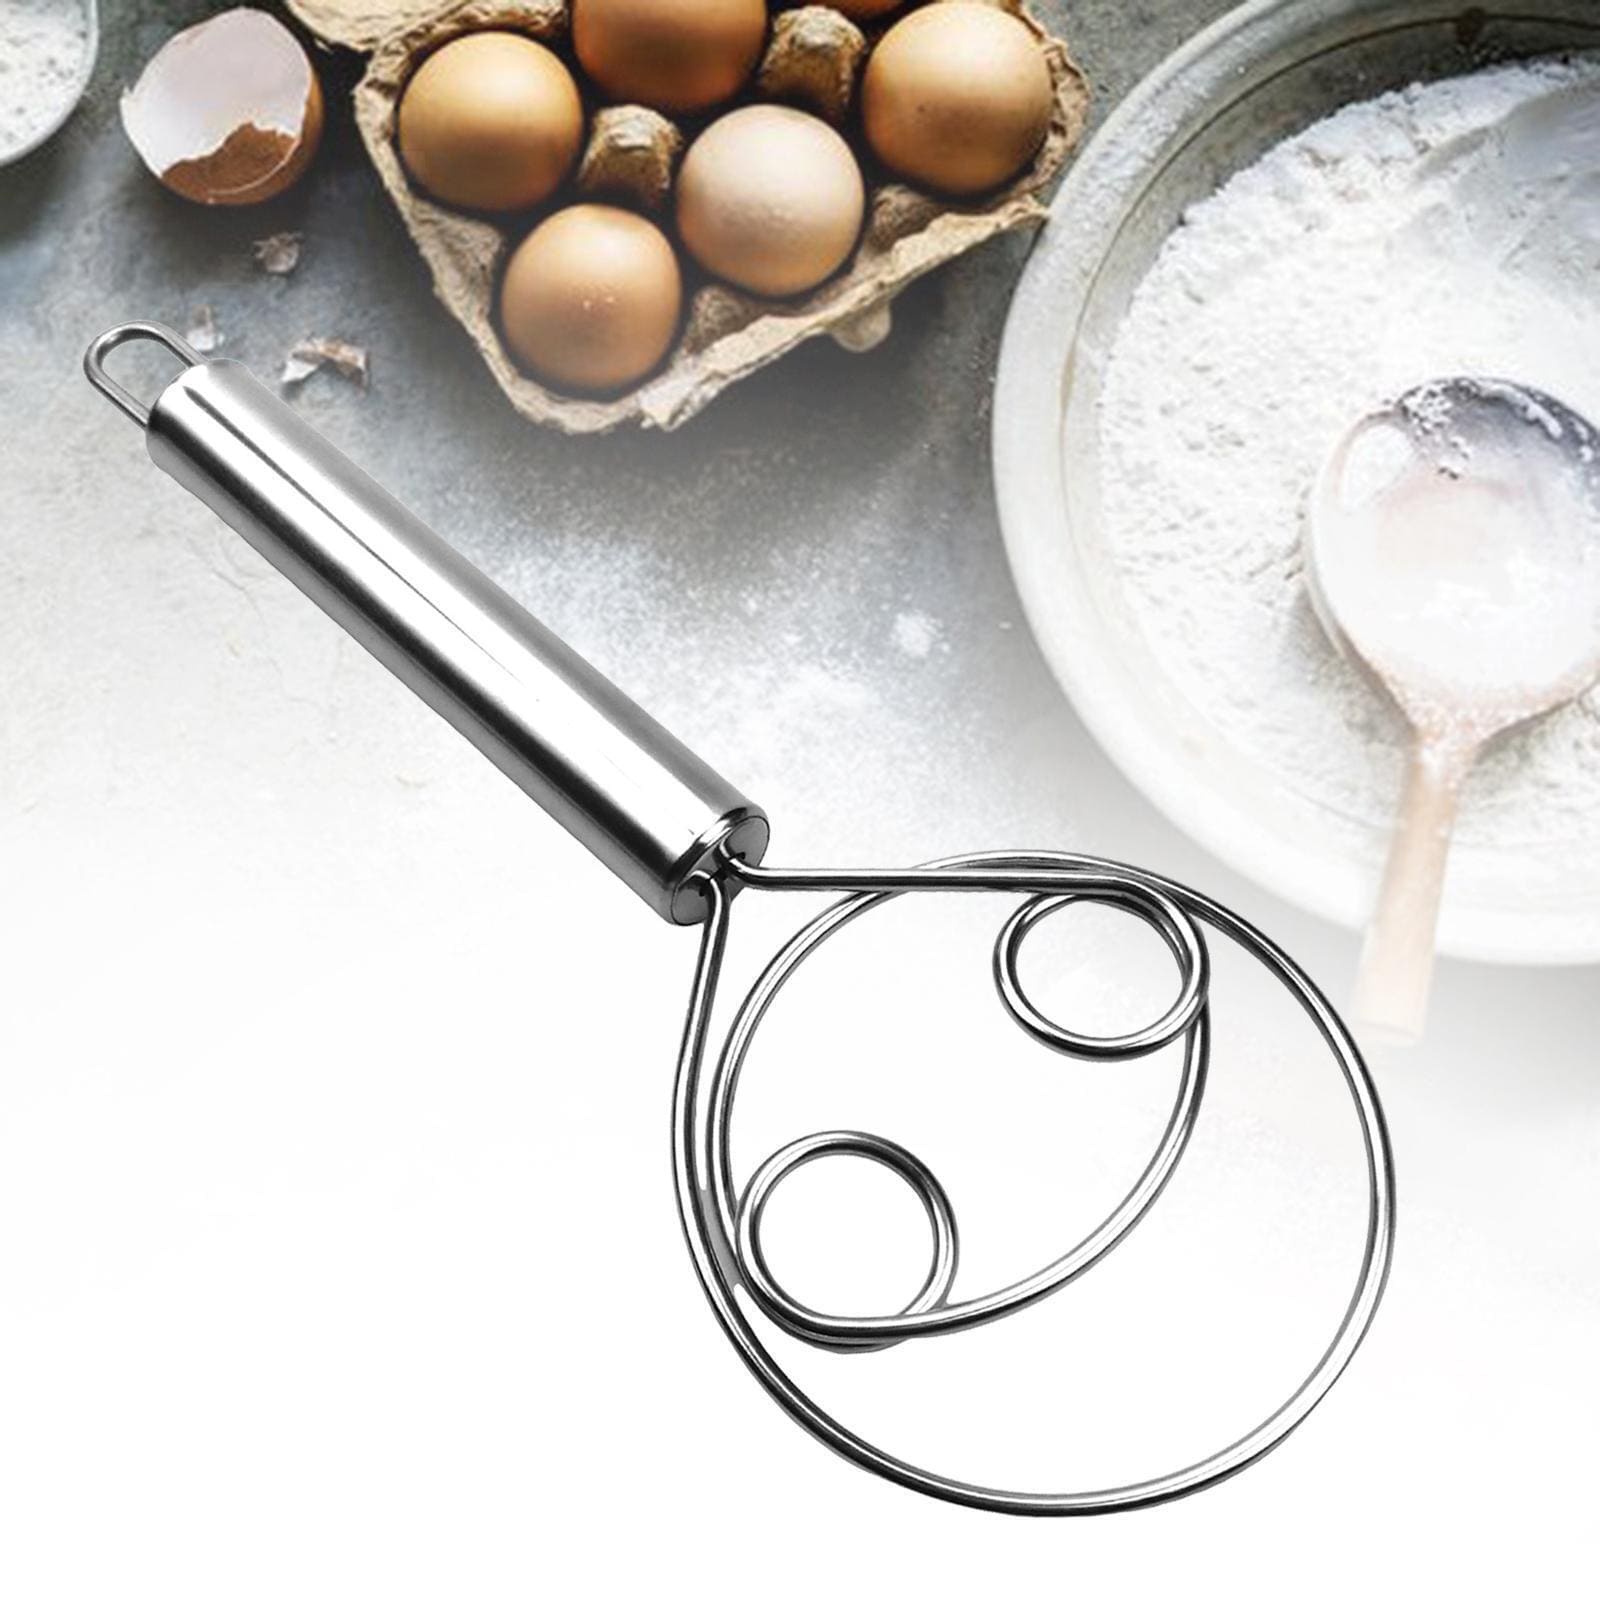 Steel Dutch Egg Beater, Manual Non Stick Quick Beater, Danish Bread Dough Hand Mixer, Stainless Steel Dough Whisk Mixer, Kitchen Baking Blender Tool, Durable Handheld Food Blender For Cooking